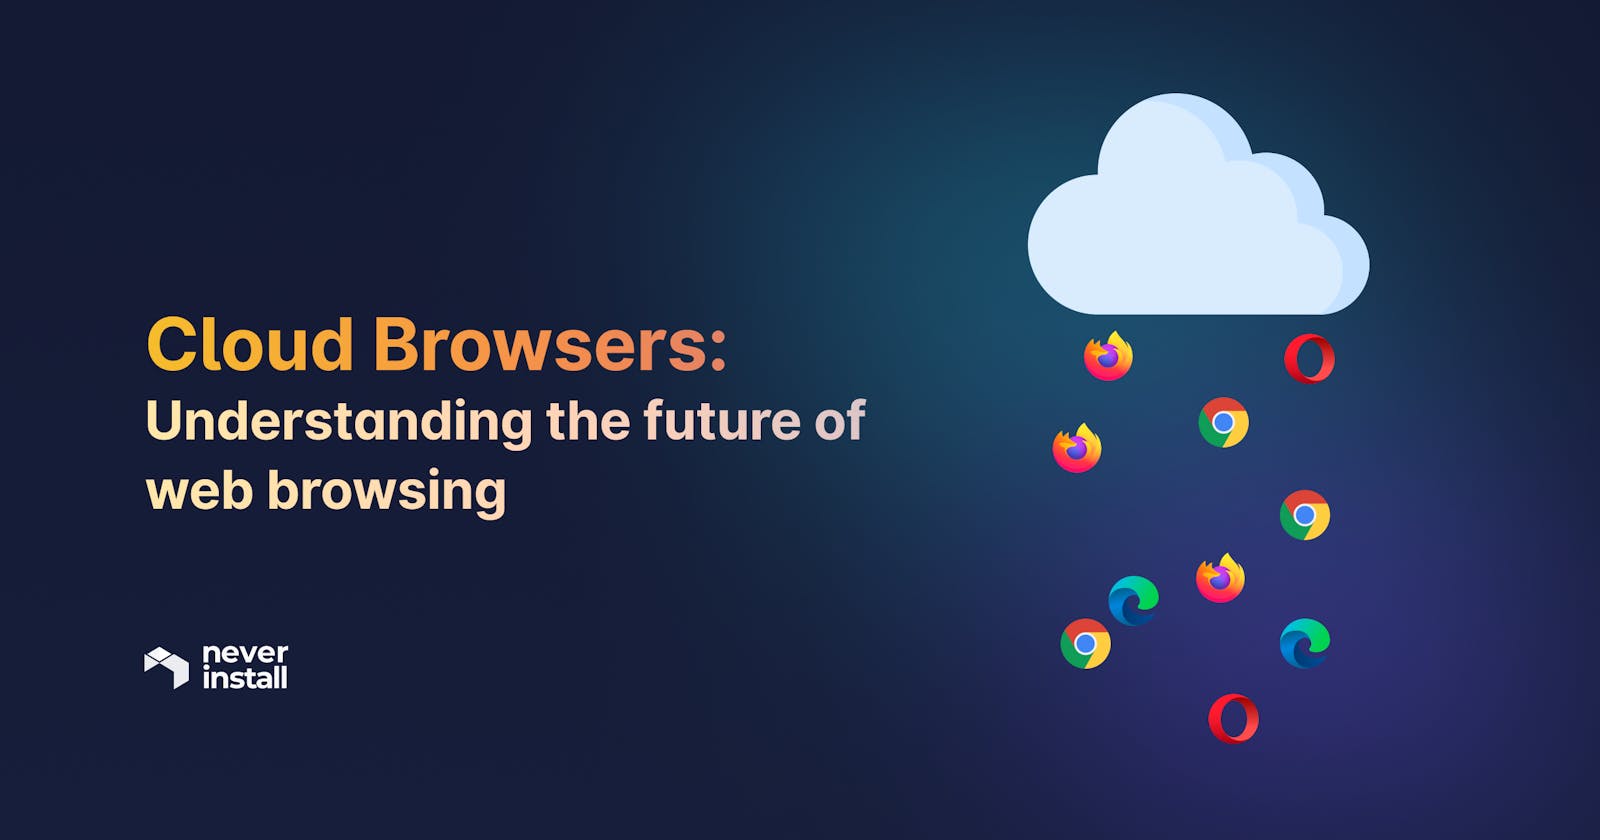 Cloud Browsers: Understanding the future of web browsing